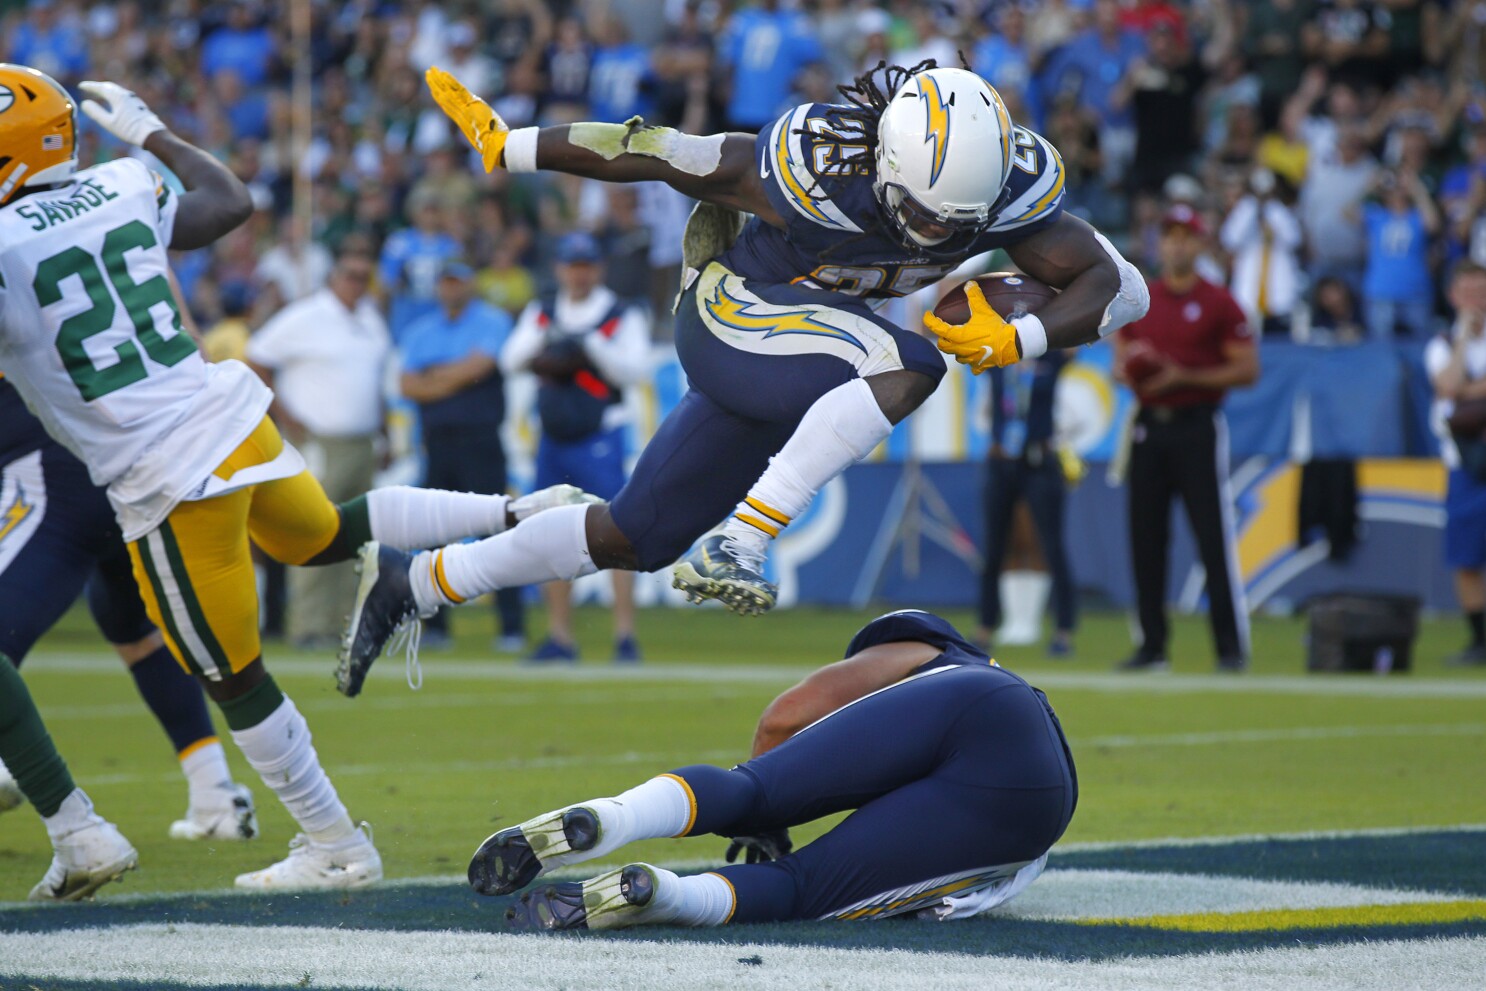 Flipboard Column Nick Canepa's Chargers report card vs. Packers